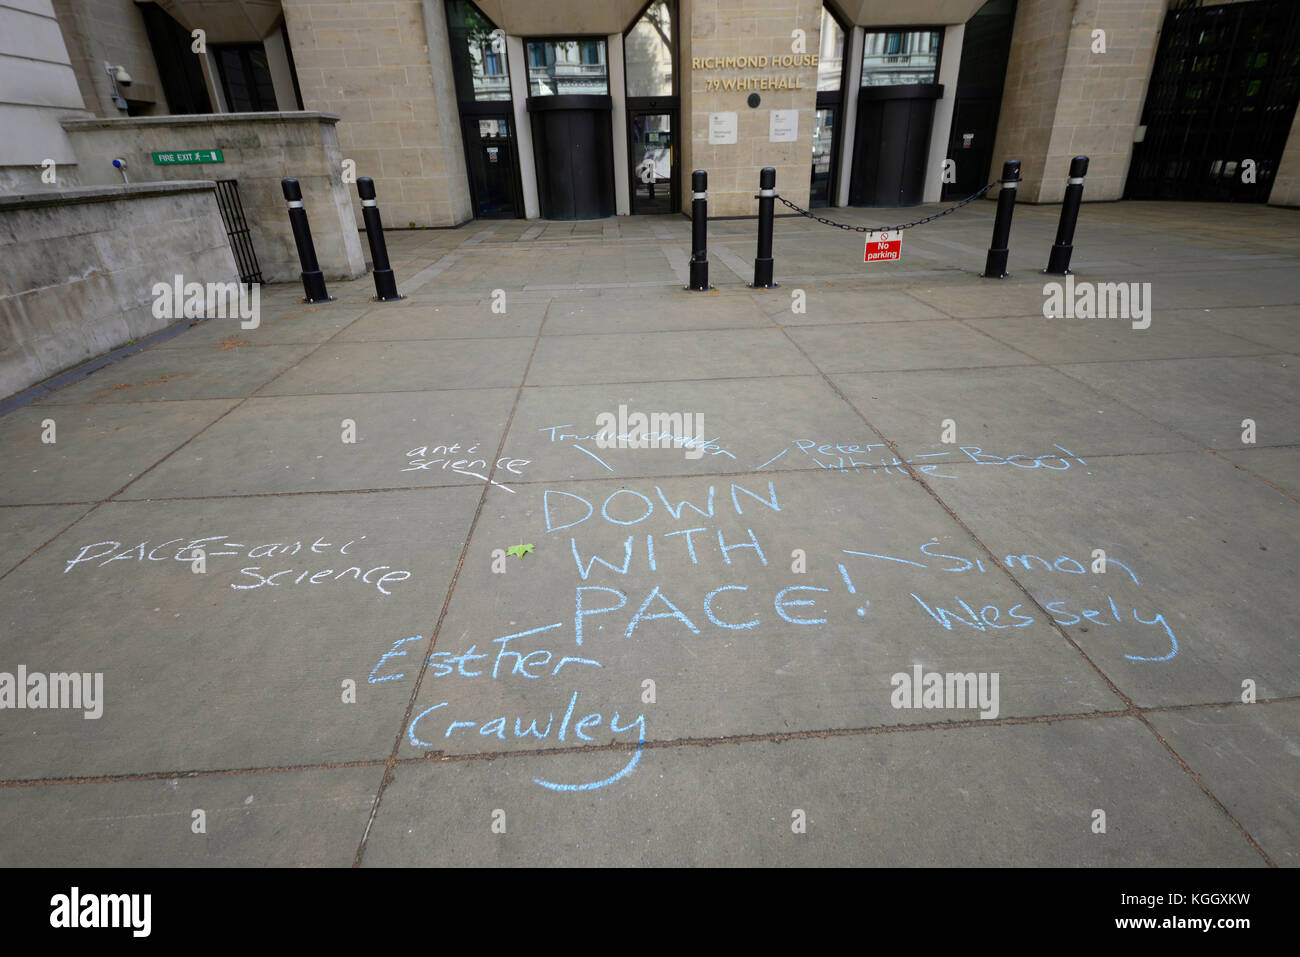 Down with PACE chalked on the pavement outside Richmond House, Whitehall, London, UK Stock Photo